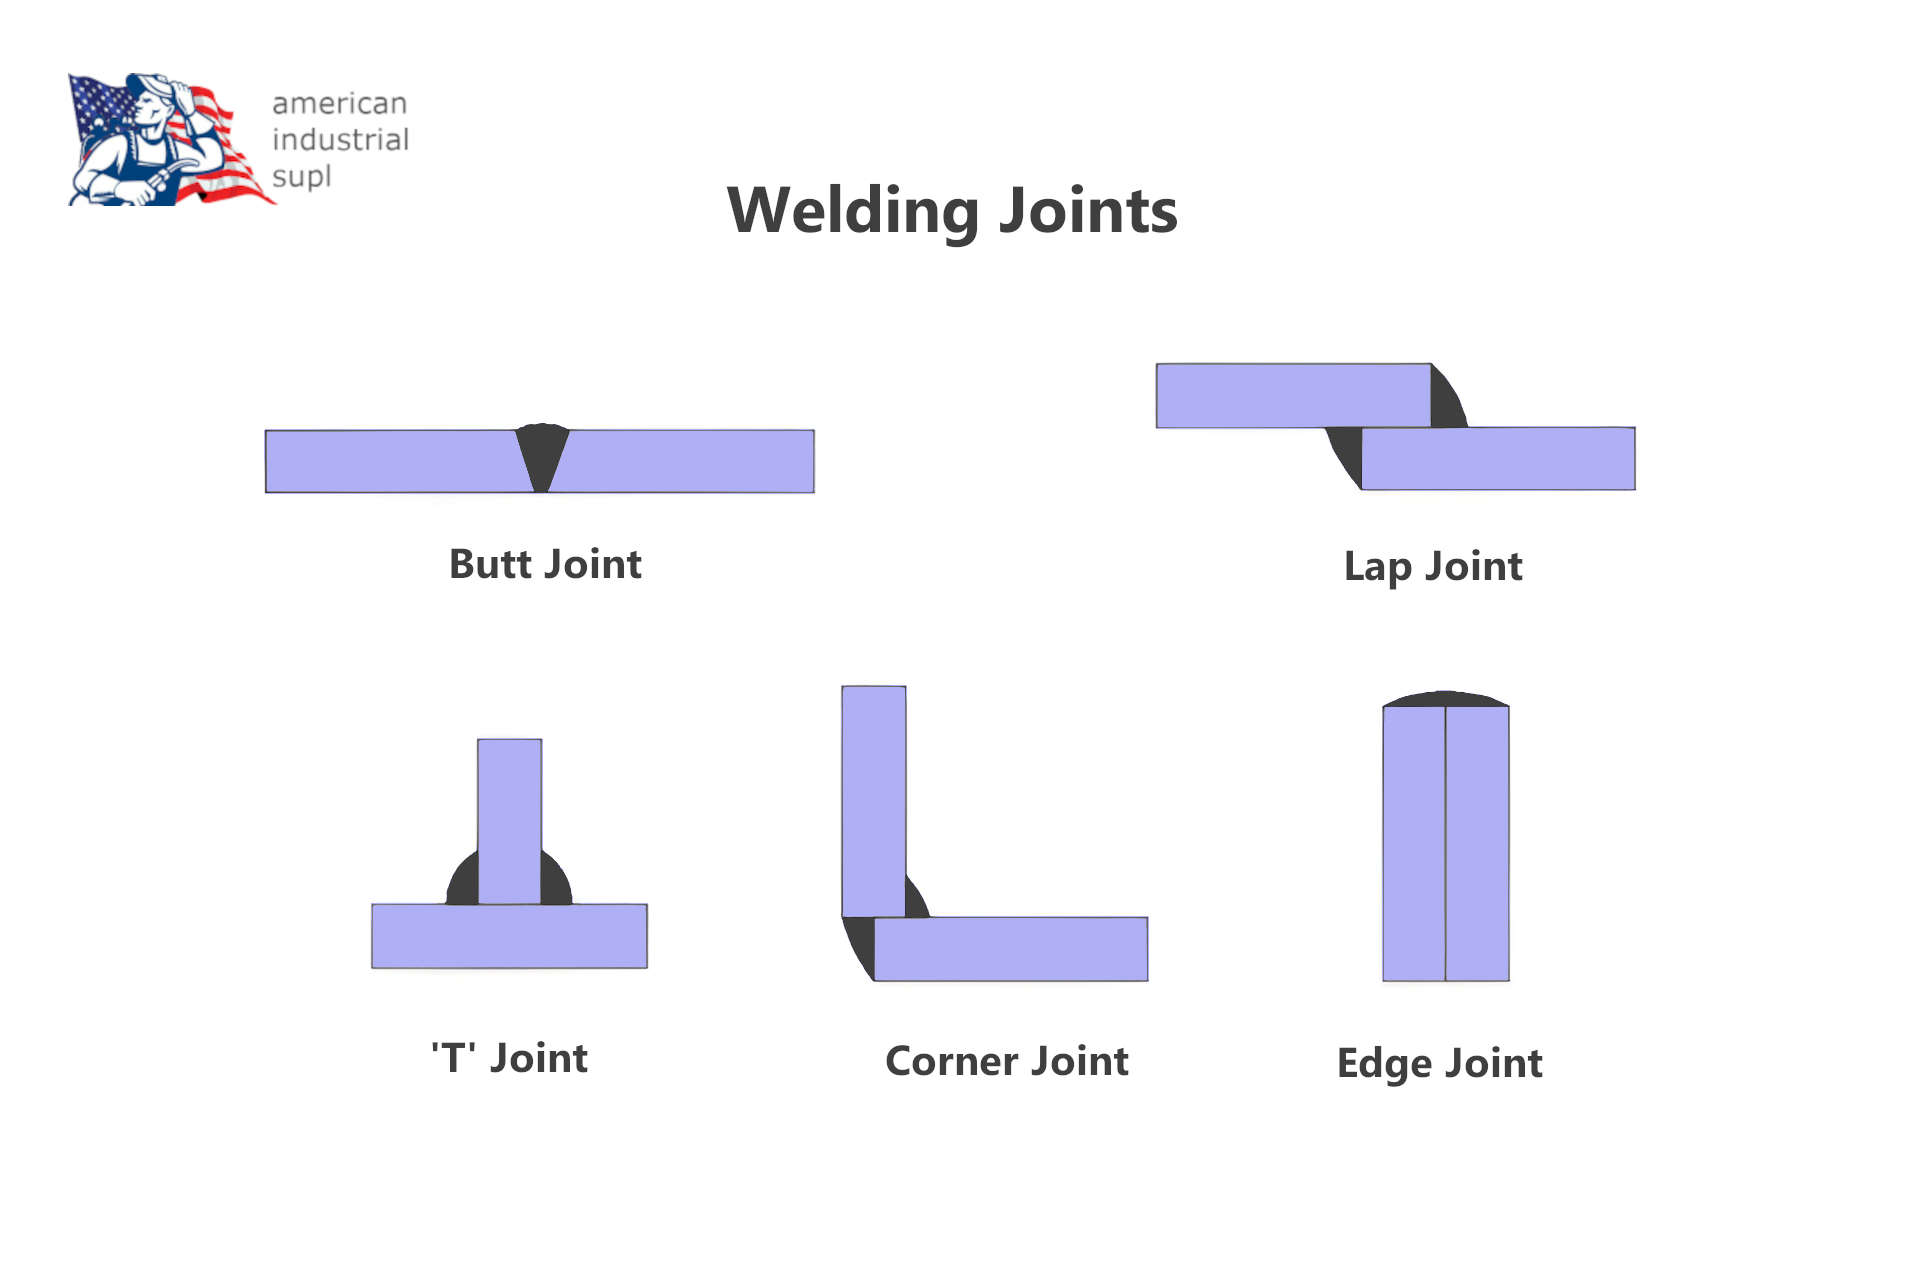 What Are the Different Types of Joints in Welding?